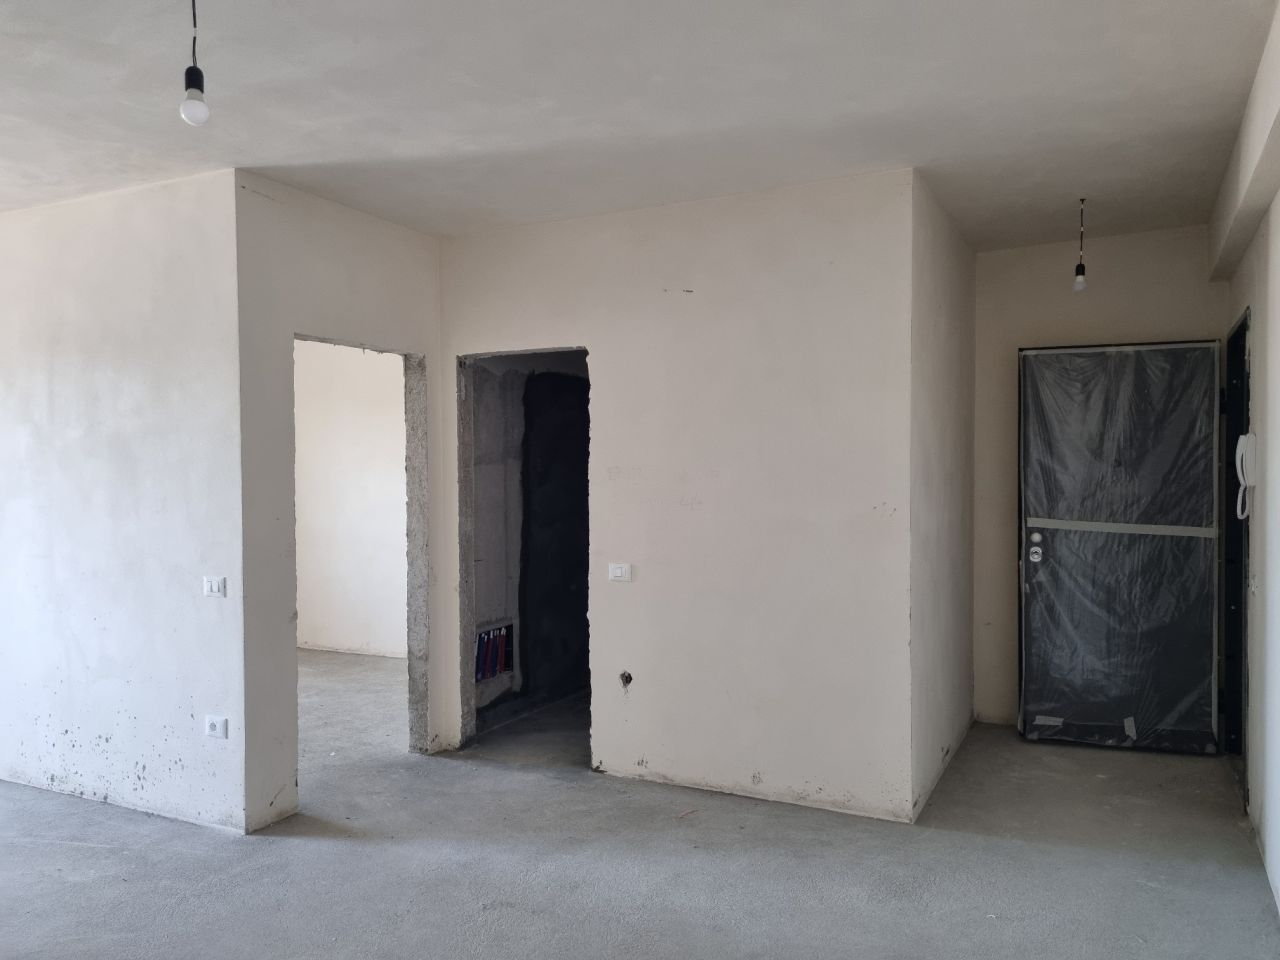 Apartment For Sale In Mali Robit Golem Durres Albania, Located In A Quiet Area, Near The Beach